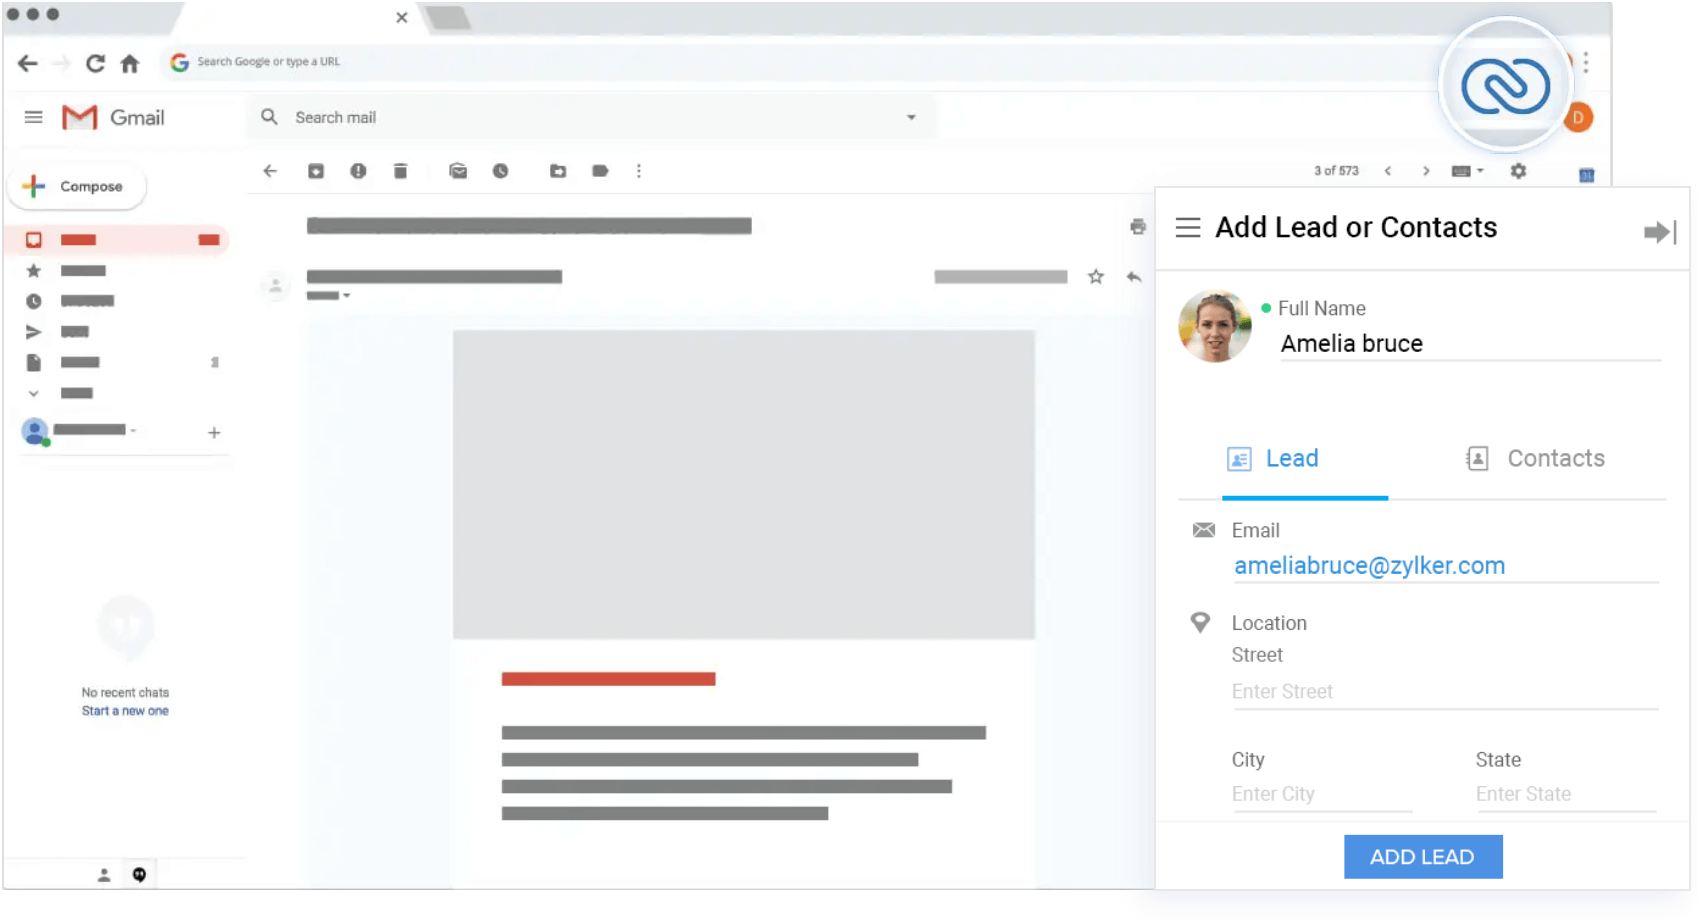 Chrome extension adds leads and contacts directly as you find them